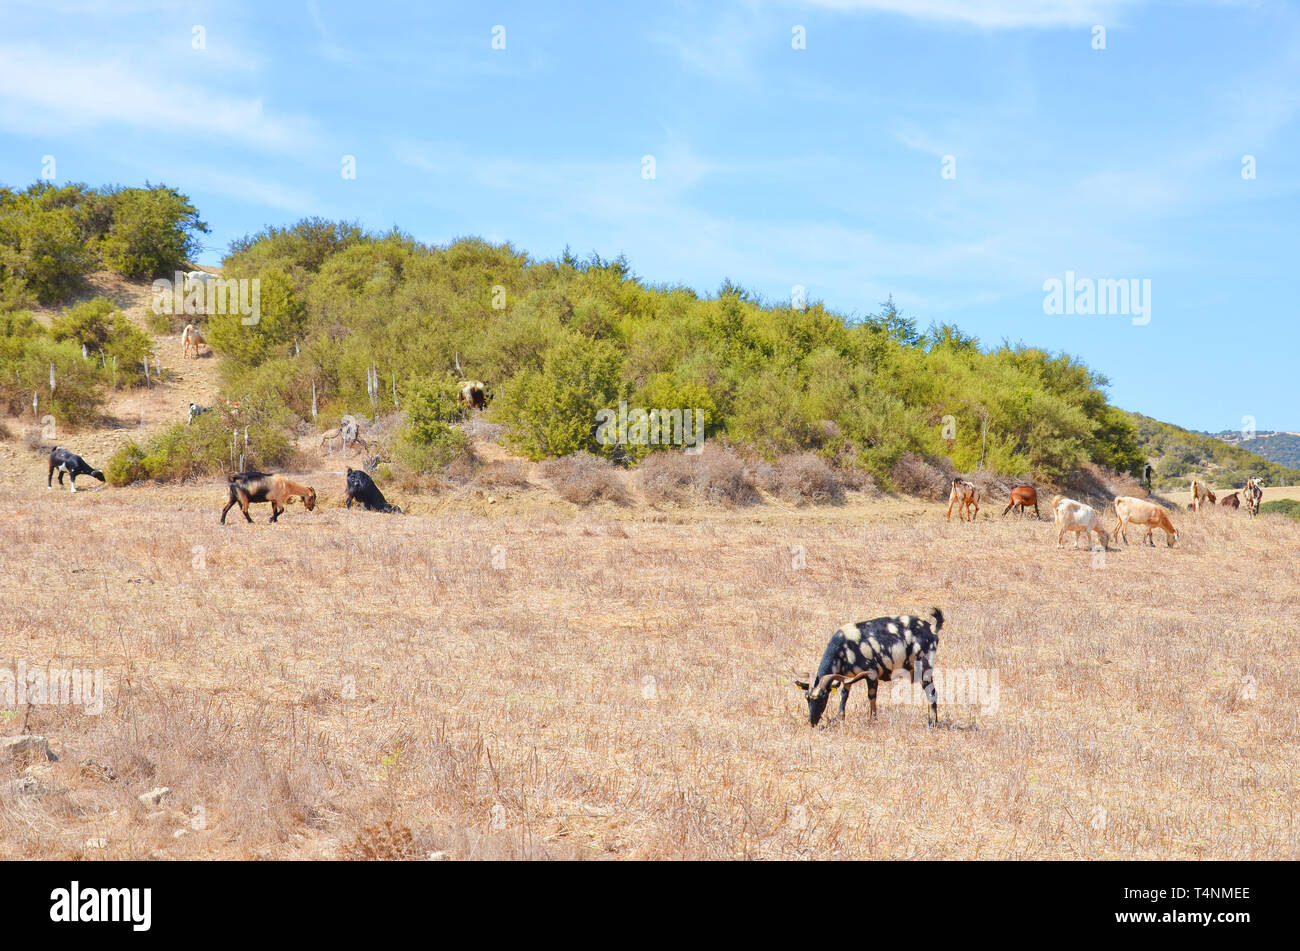 Amazing herd of goats grazing in the hills of Karpas Peninsula in the Turkish part of Cyprus. Remote region of Northern Cyprus with no tourists. Stock Photo